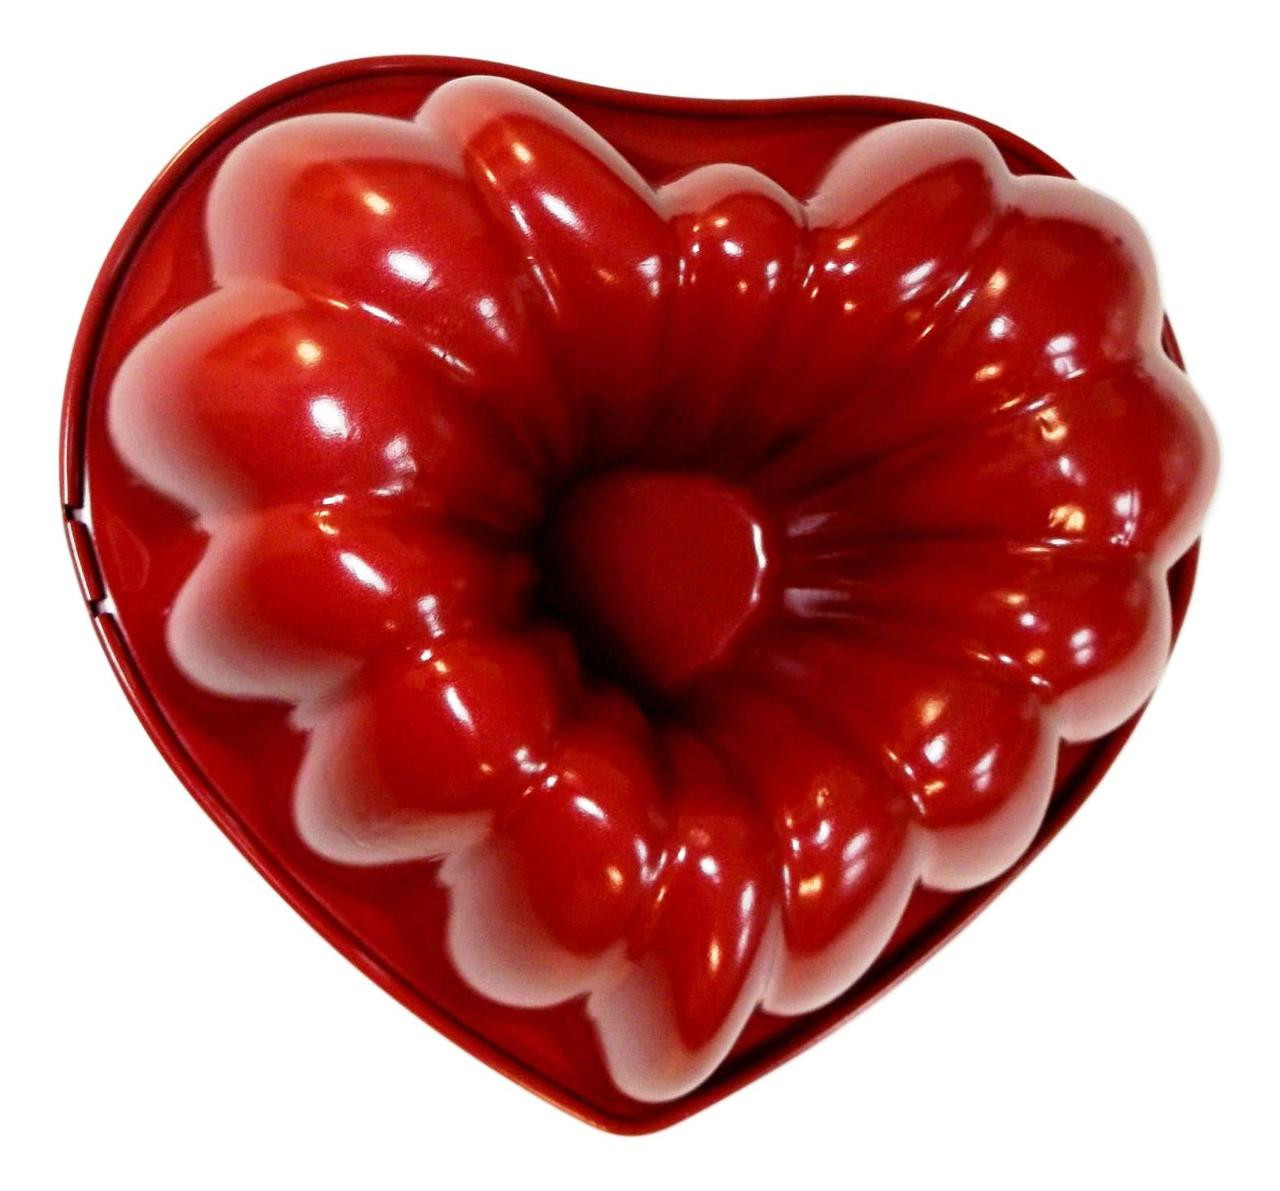 Wilton Red Heart-Shaped Non-Stick Fluted Tube Pan, 8